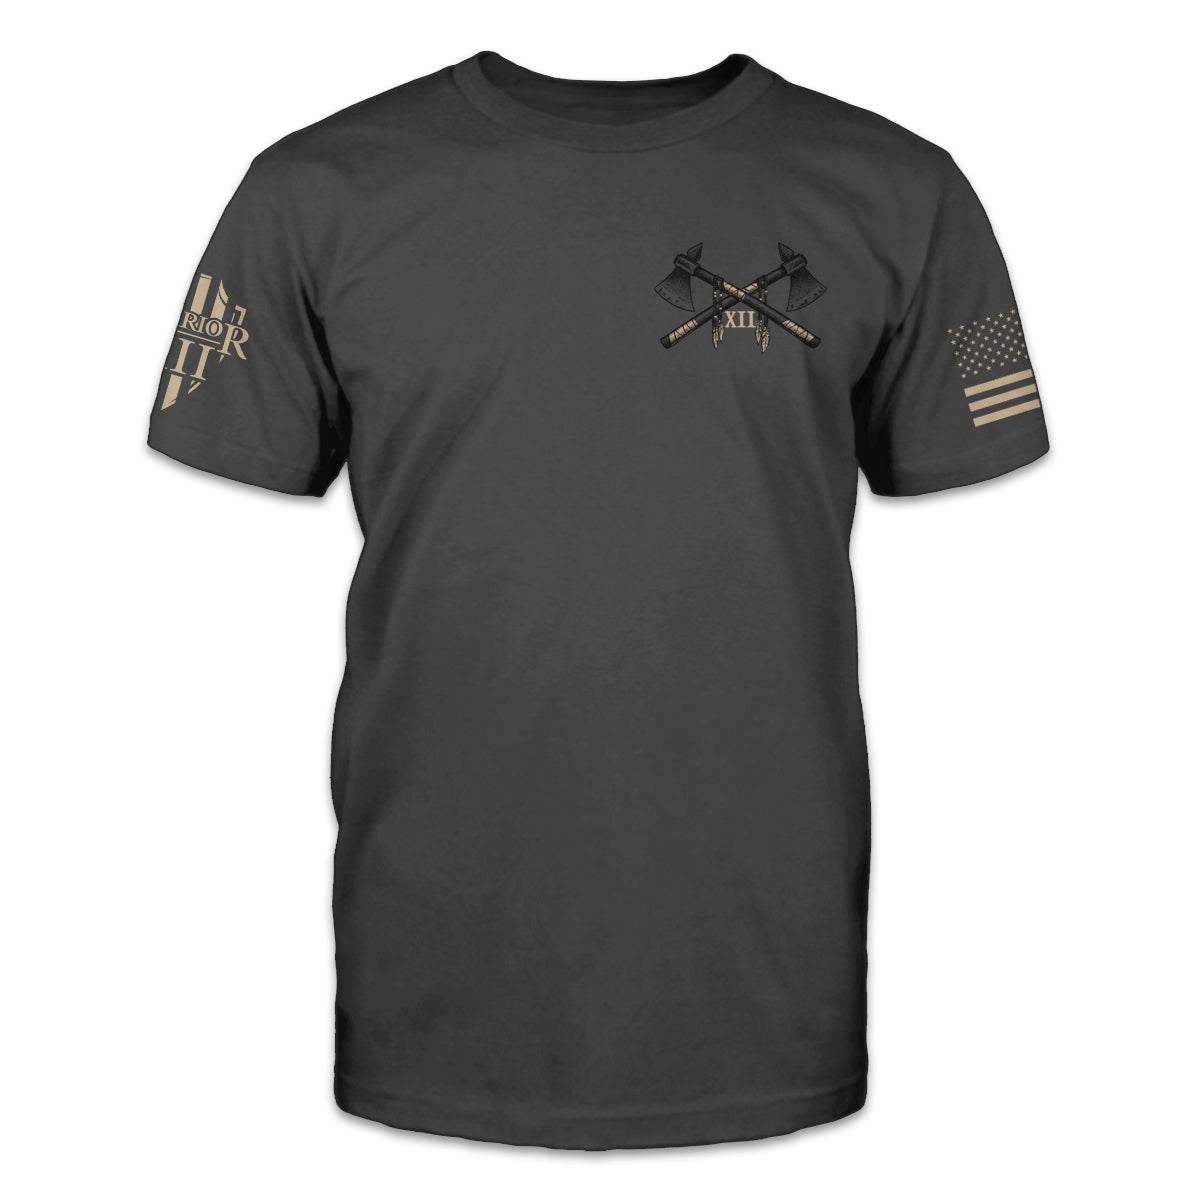 A dark grey t-shirt with two axes crossed over printed on the front of the shirt.